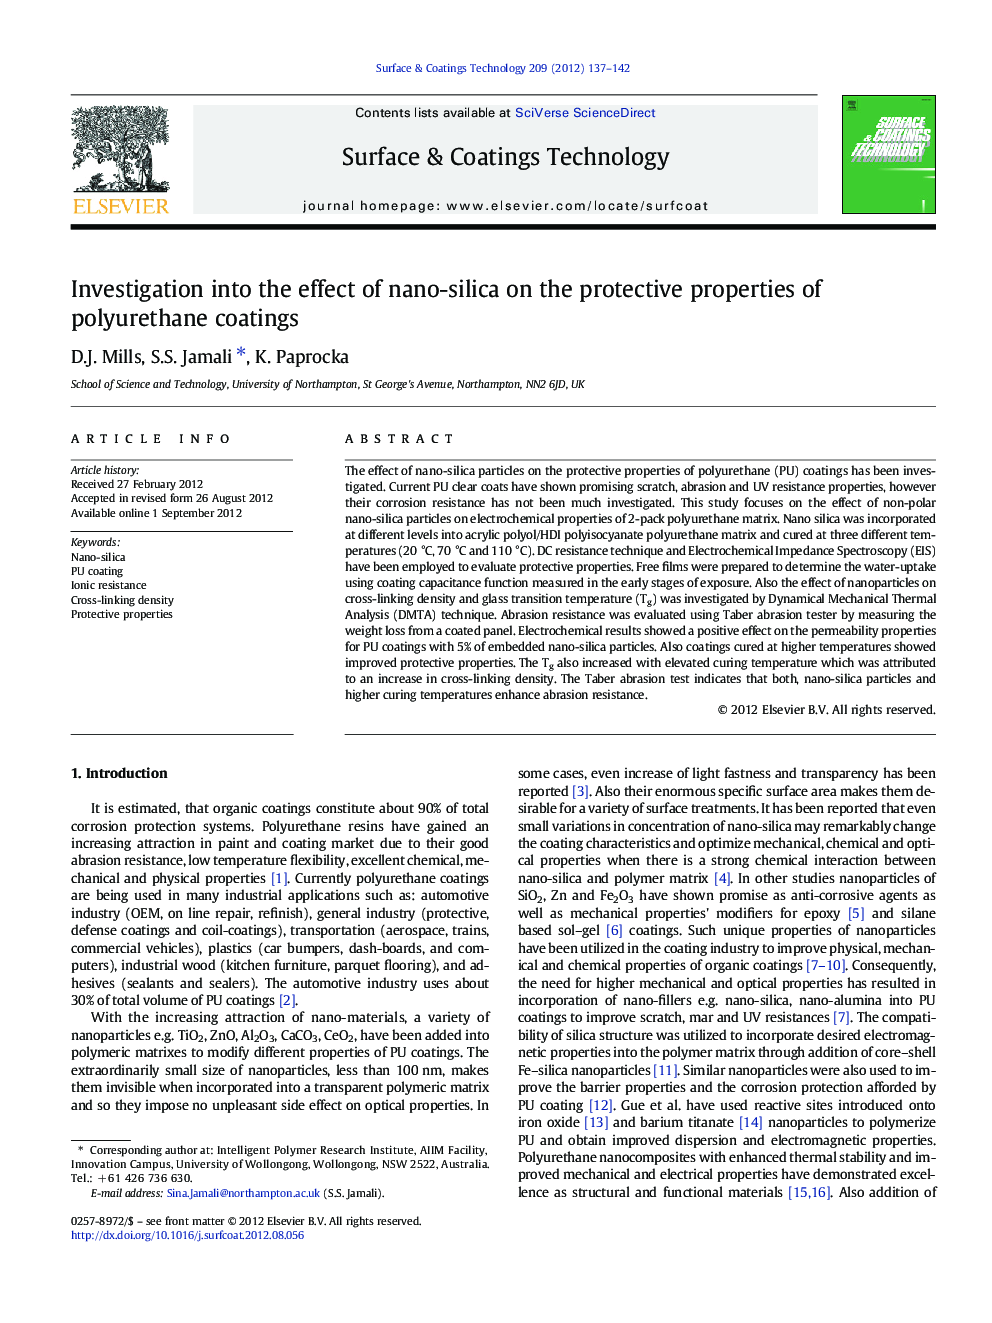 Investigation into the effect of nano-silica on the protective properties of polyurethane coatings